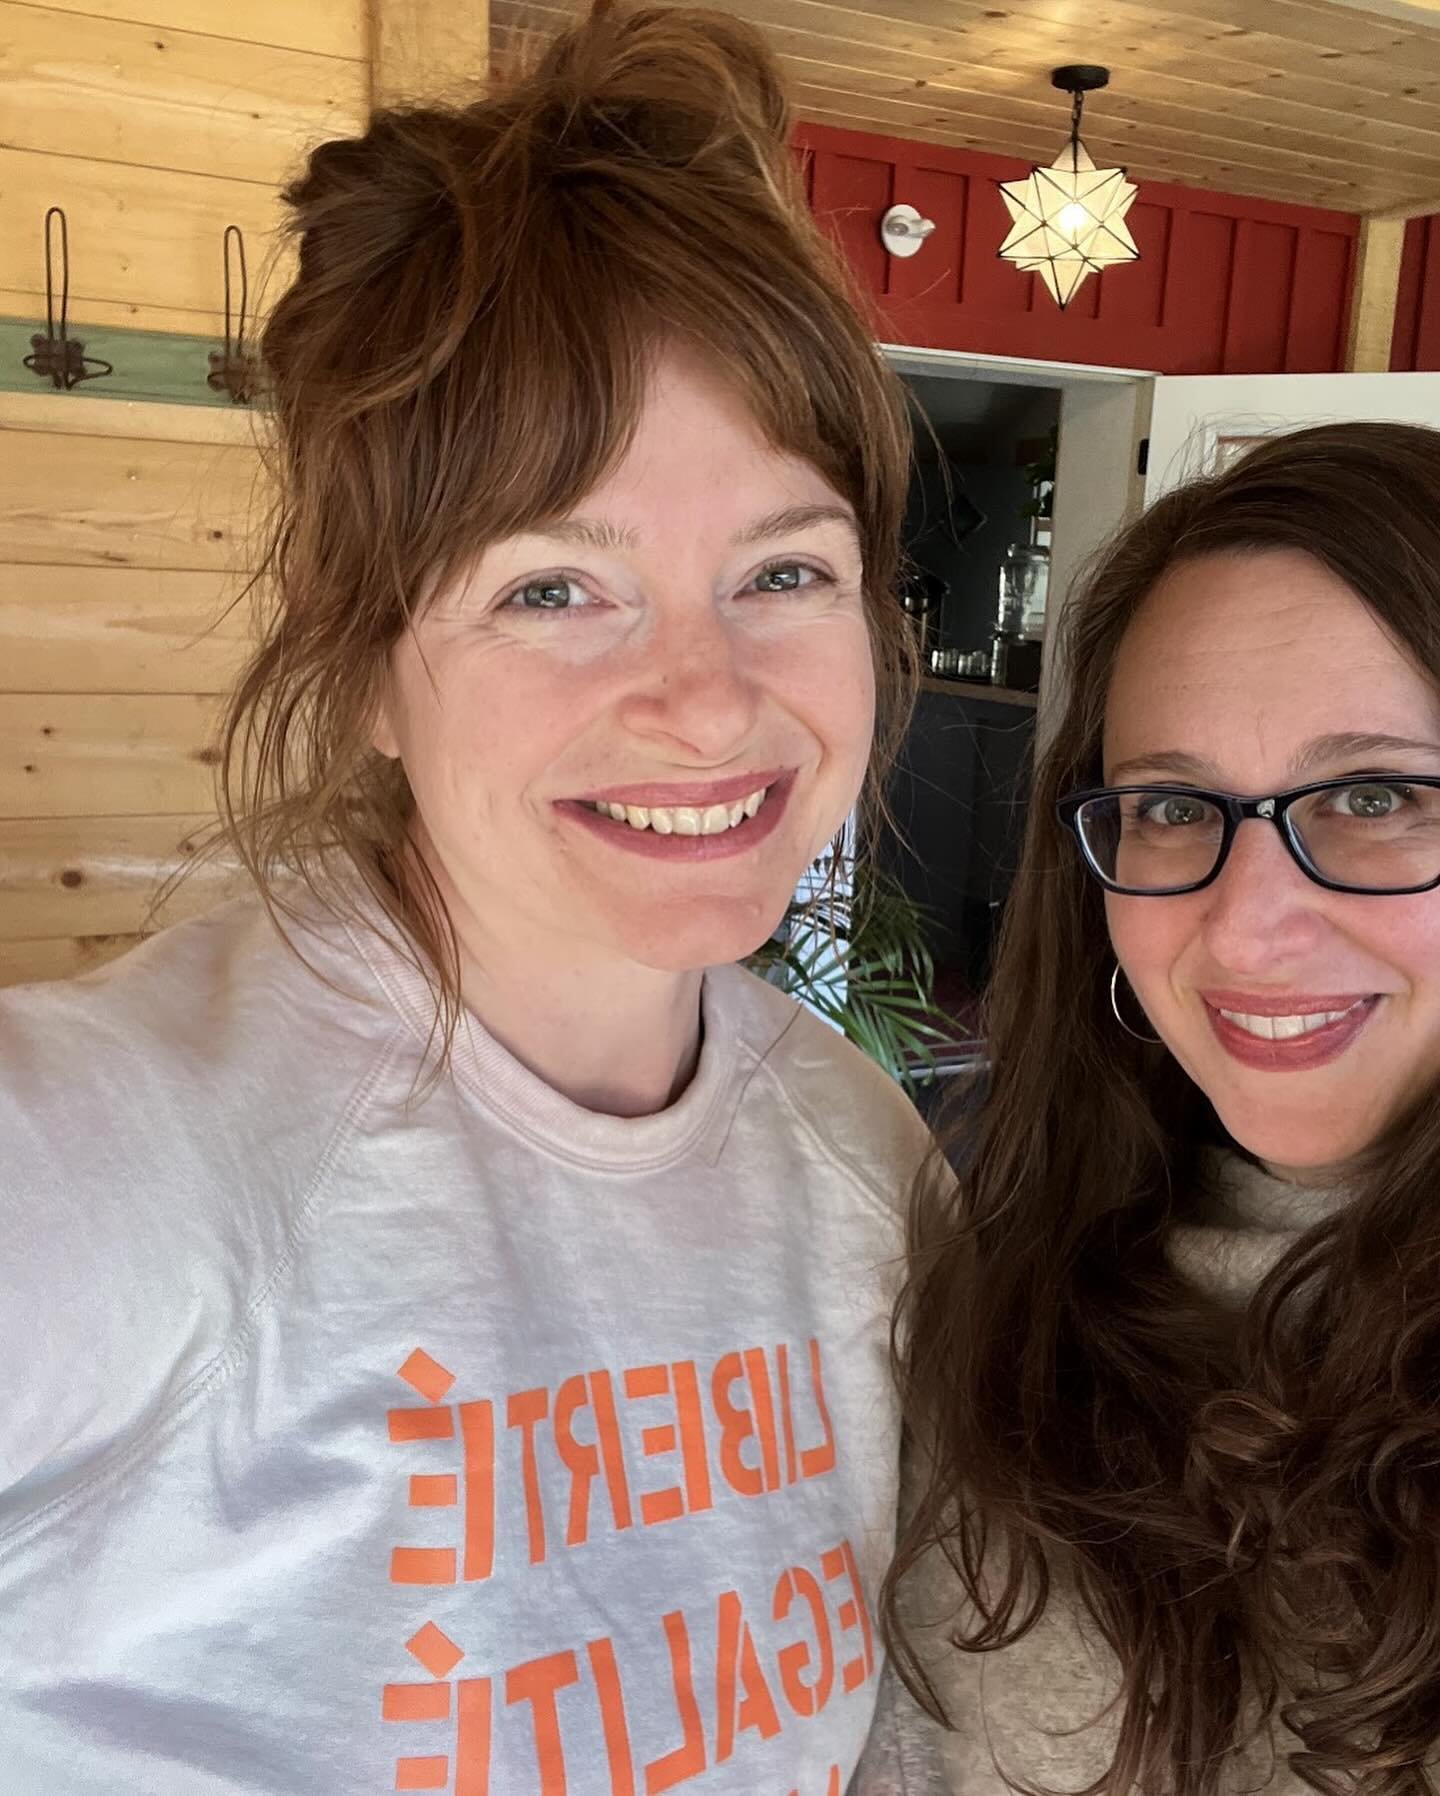 Join authors and teachers @amyshearnwrites and @sarah_mccoll for the @redcloverwritingretreat Oct 17-20th. 

Participants in last year&rsquo;s inaugural Red Clover Ranch Writing Retreat described the experience as magical, nourishing, and life-changi